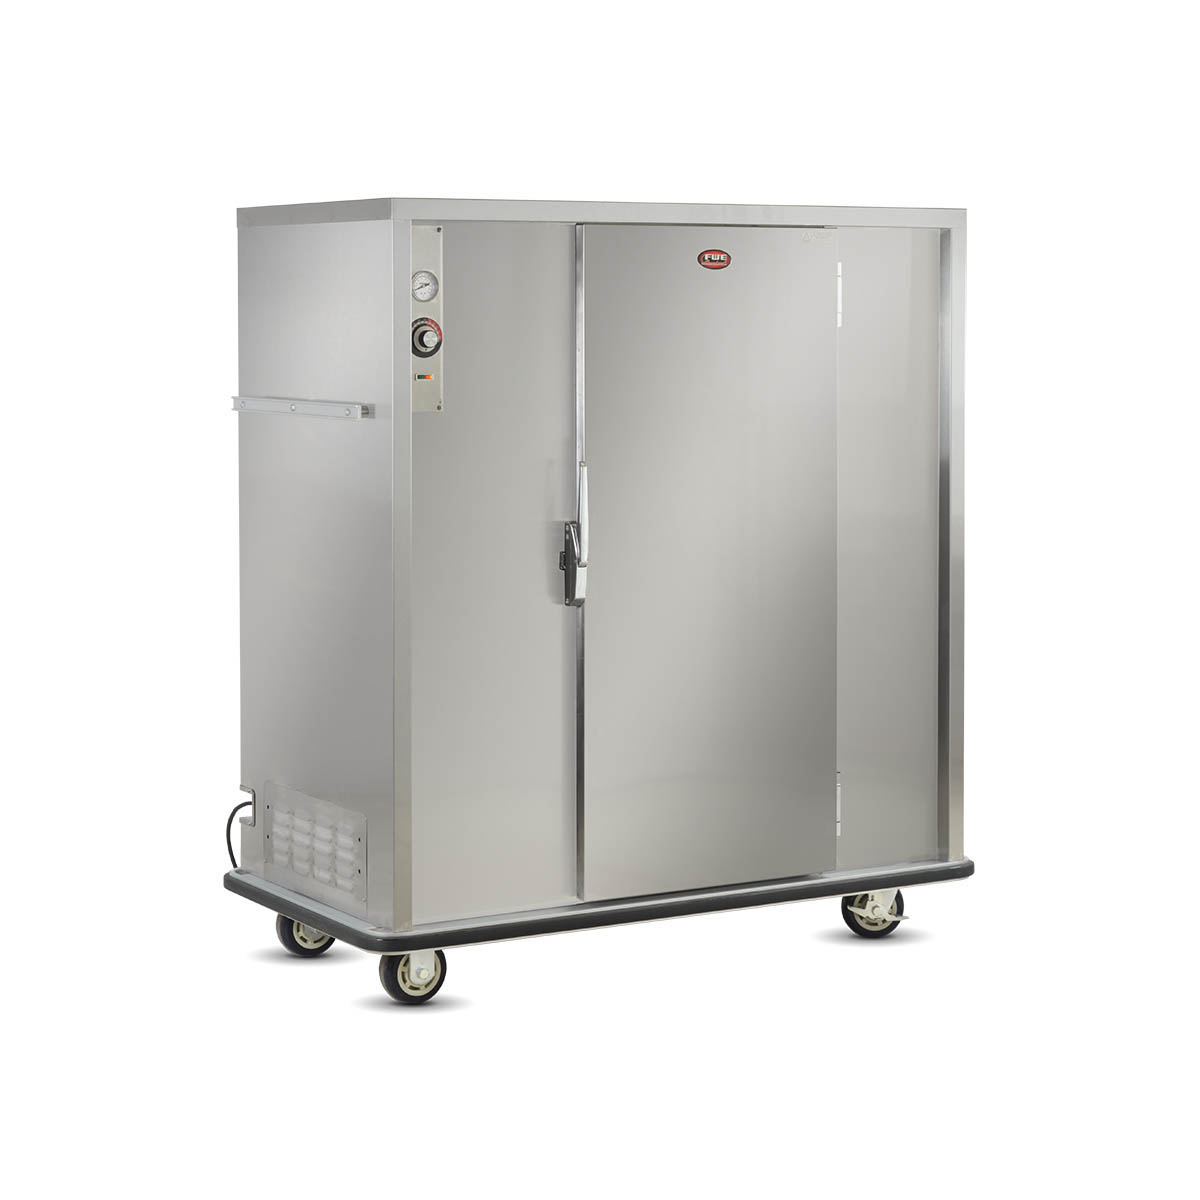 FWE A-120 Insulated Banquet Heated Cabinet, 120 Plates